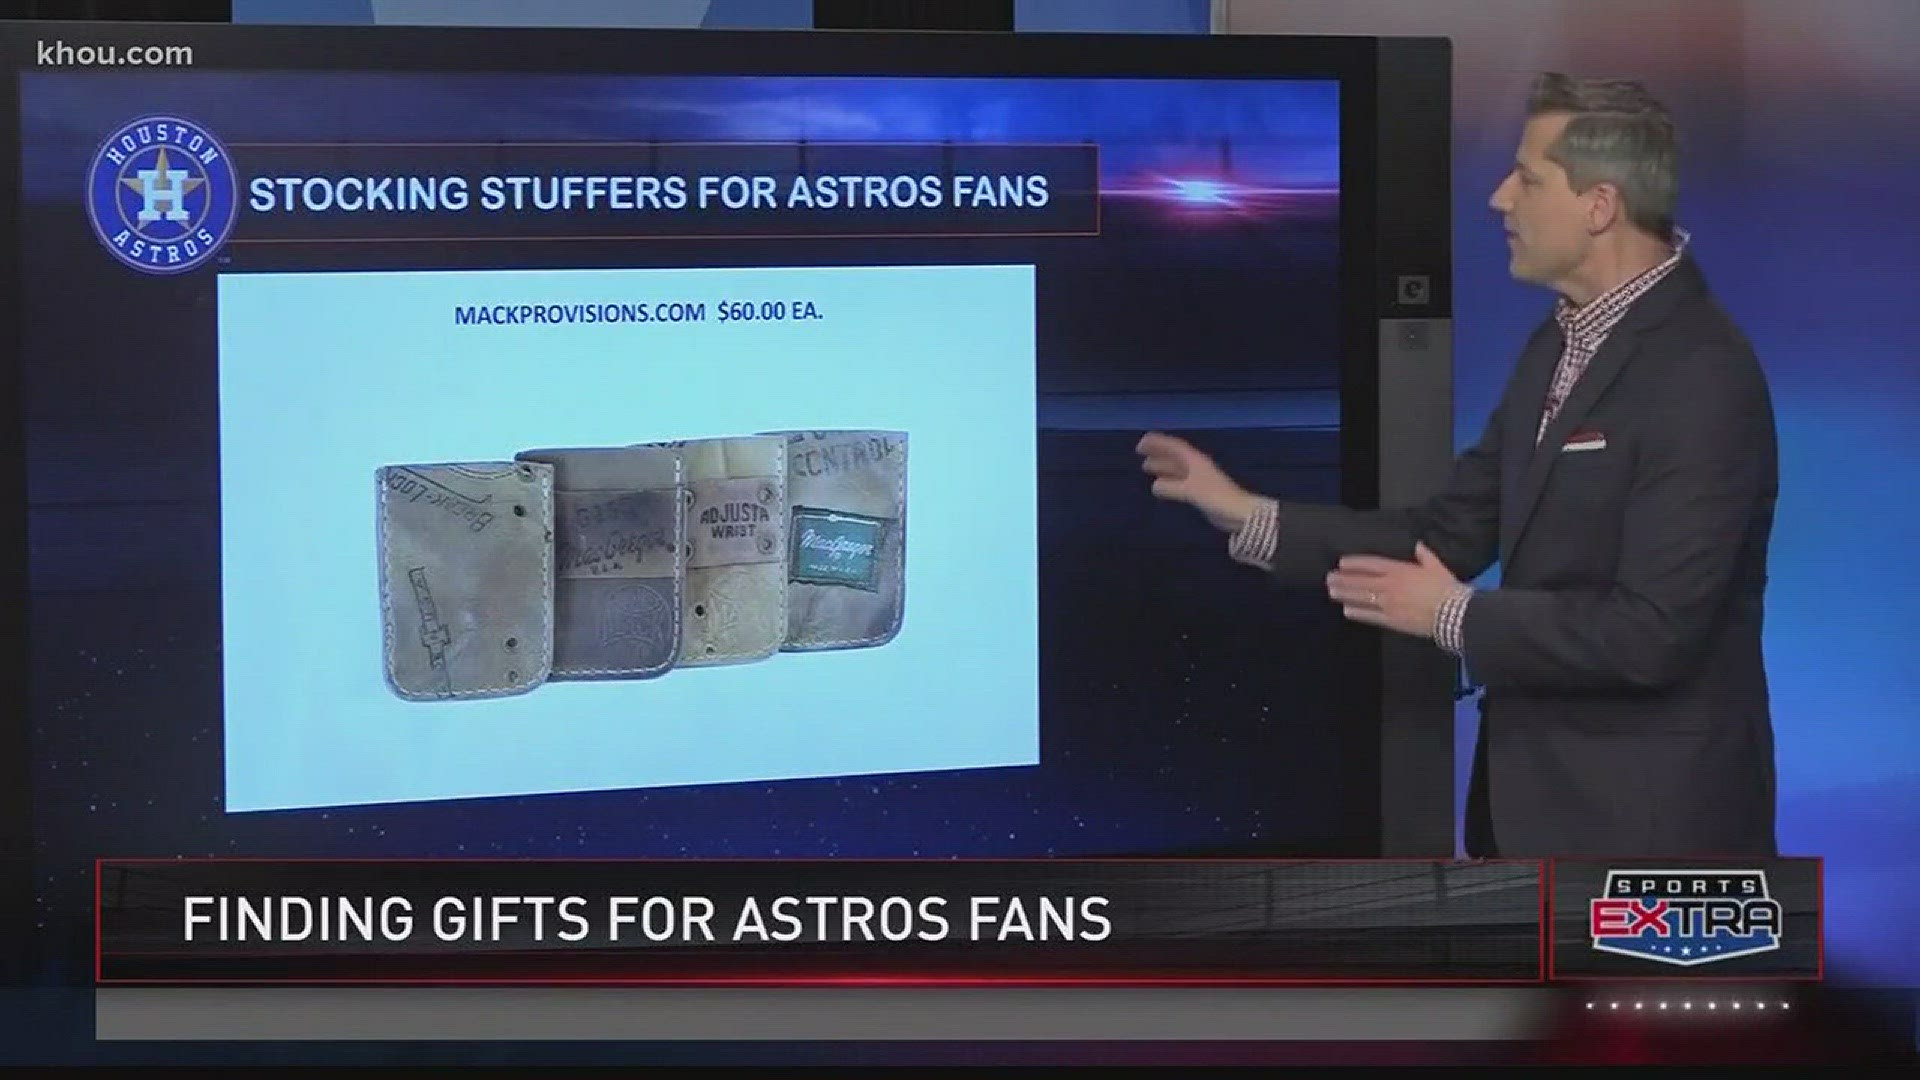 KHOU 11 anchor Jason Bristol has some cool stocking stuffers for the Astros fan who has almost everything.